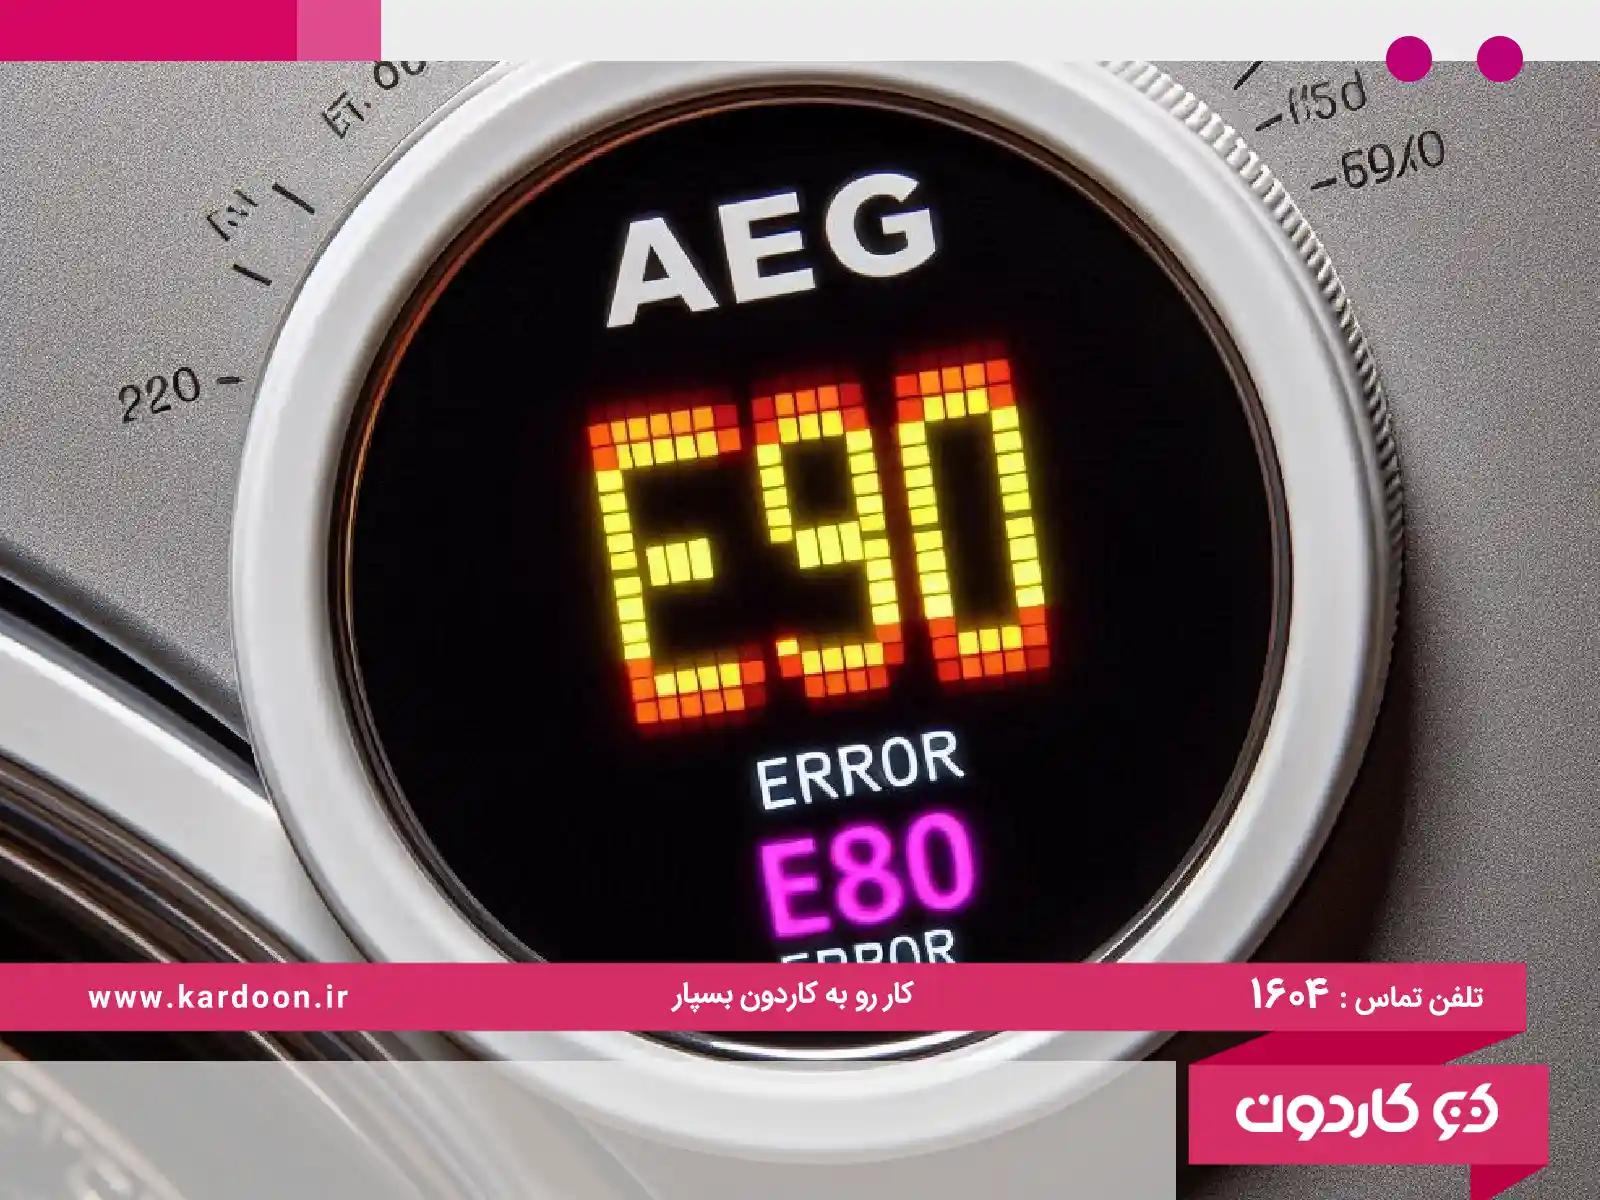 The cause of the error e80 and e90 washing machine AAG